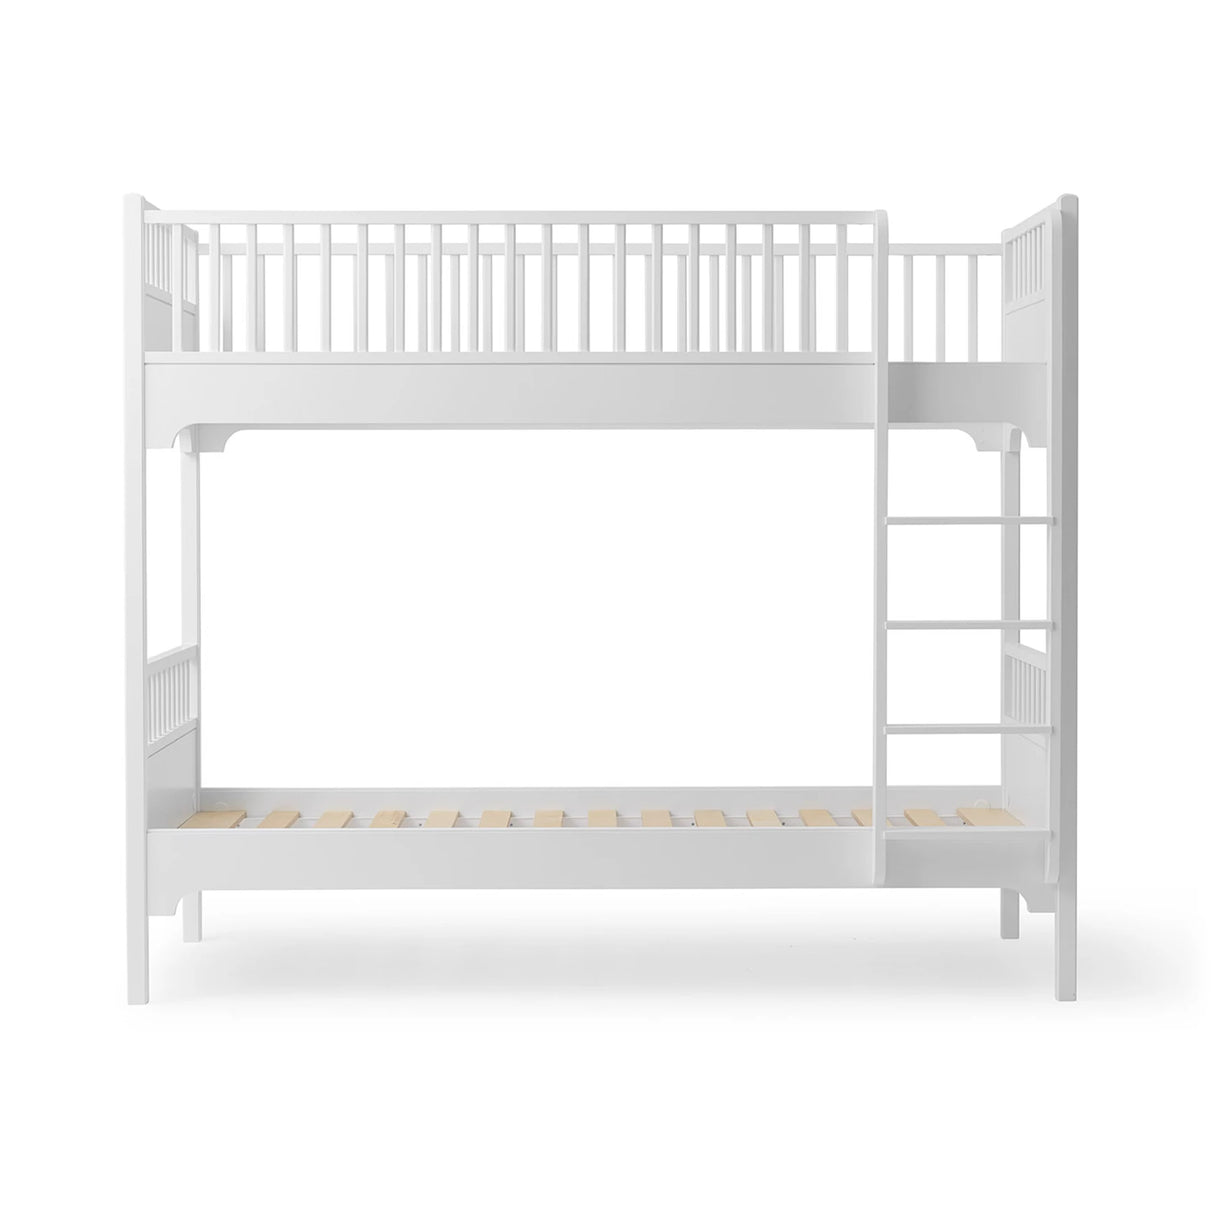 FREE Installation - Oliver Furniture Seaside Classic Bunk Bed with Vertical Ladder in White - Little Snoozes